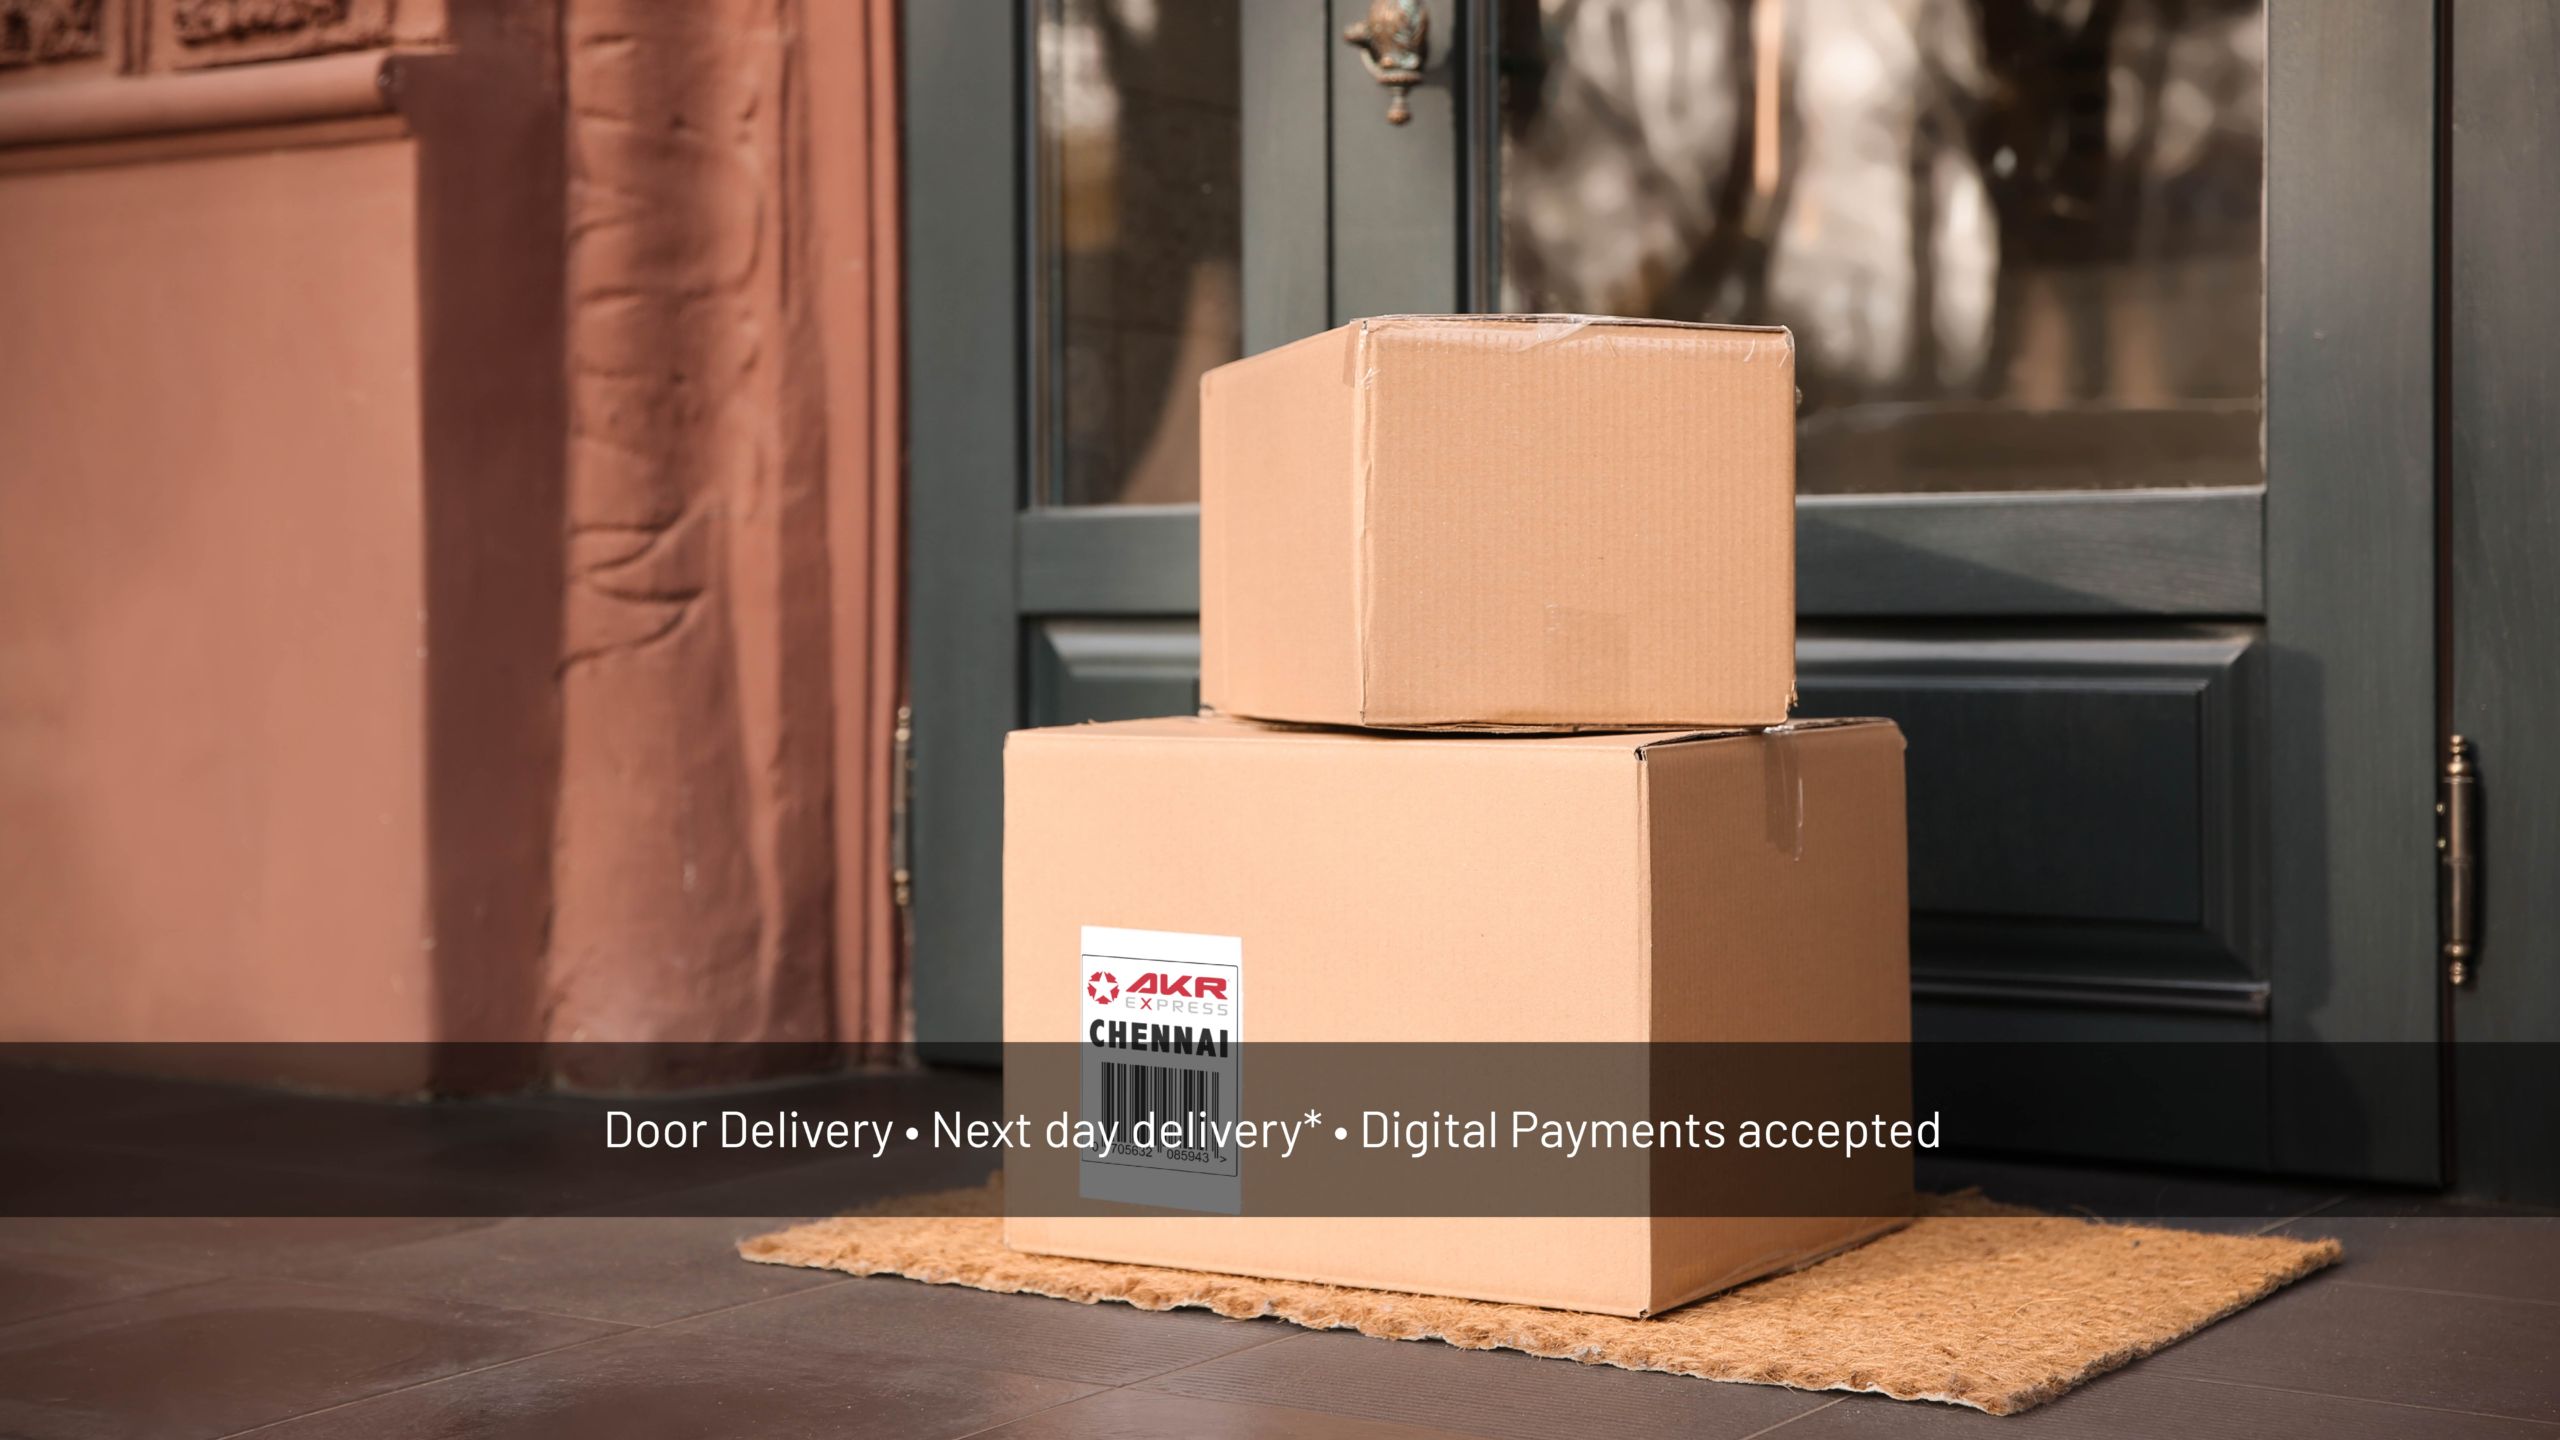 AKR Express Door Delivery and Next Day Delivery